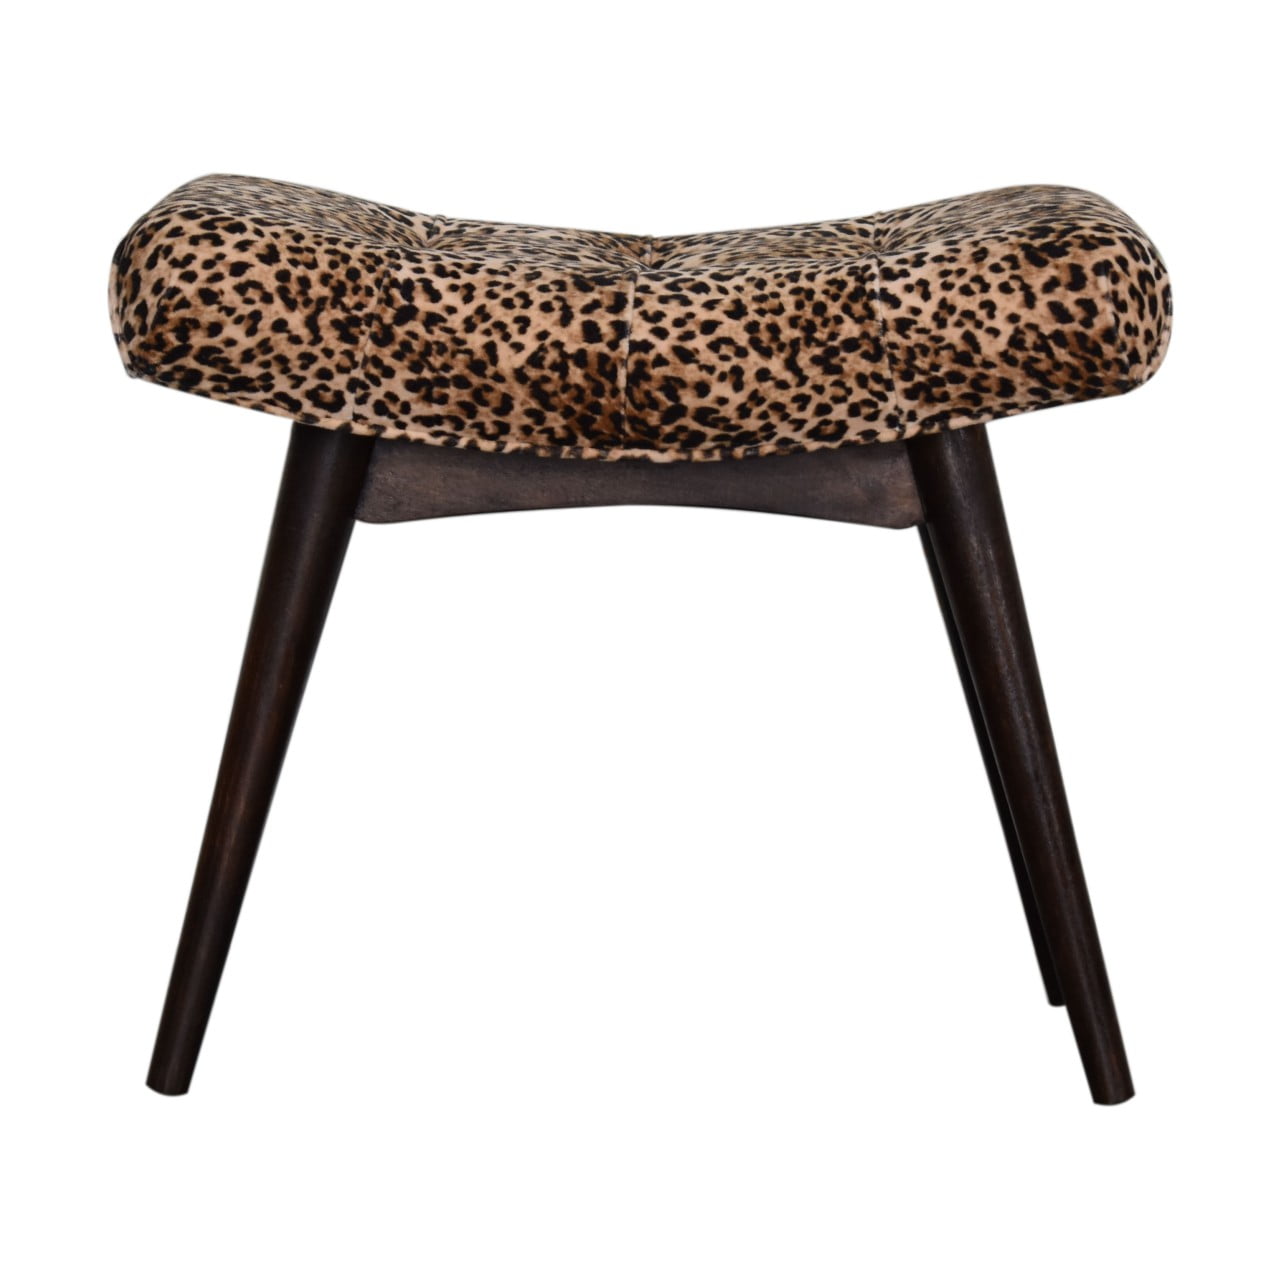 View Leopard Print Curved Bench information